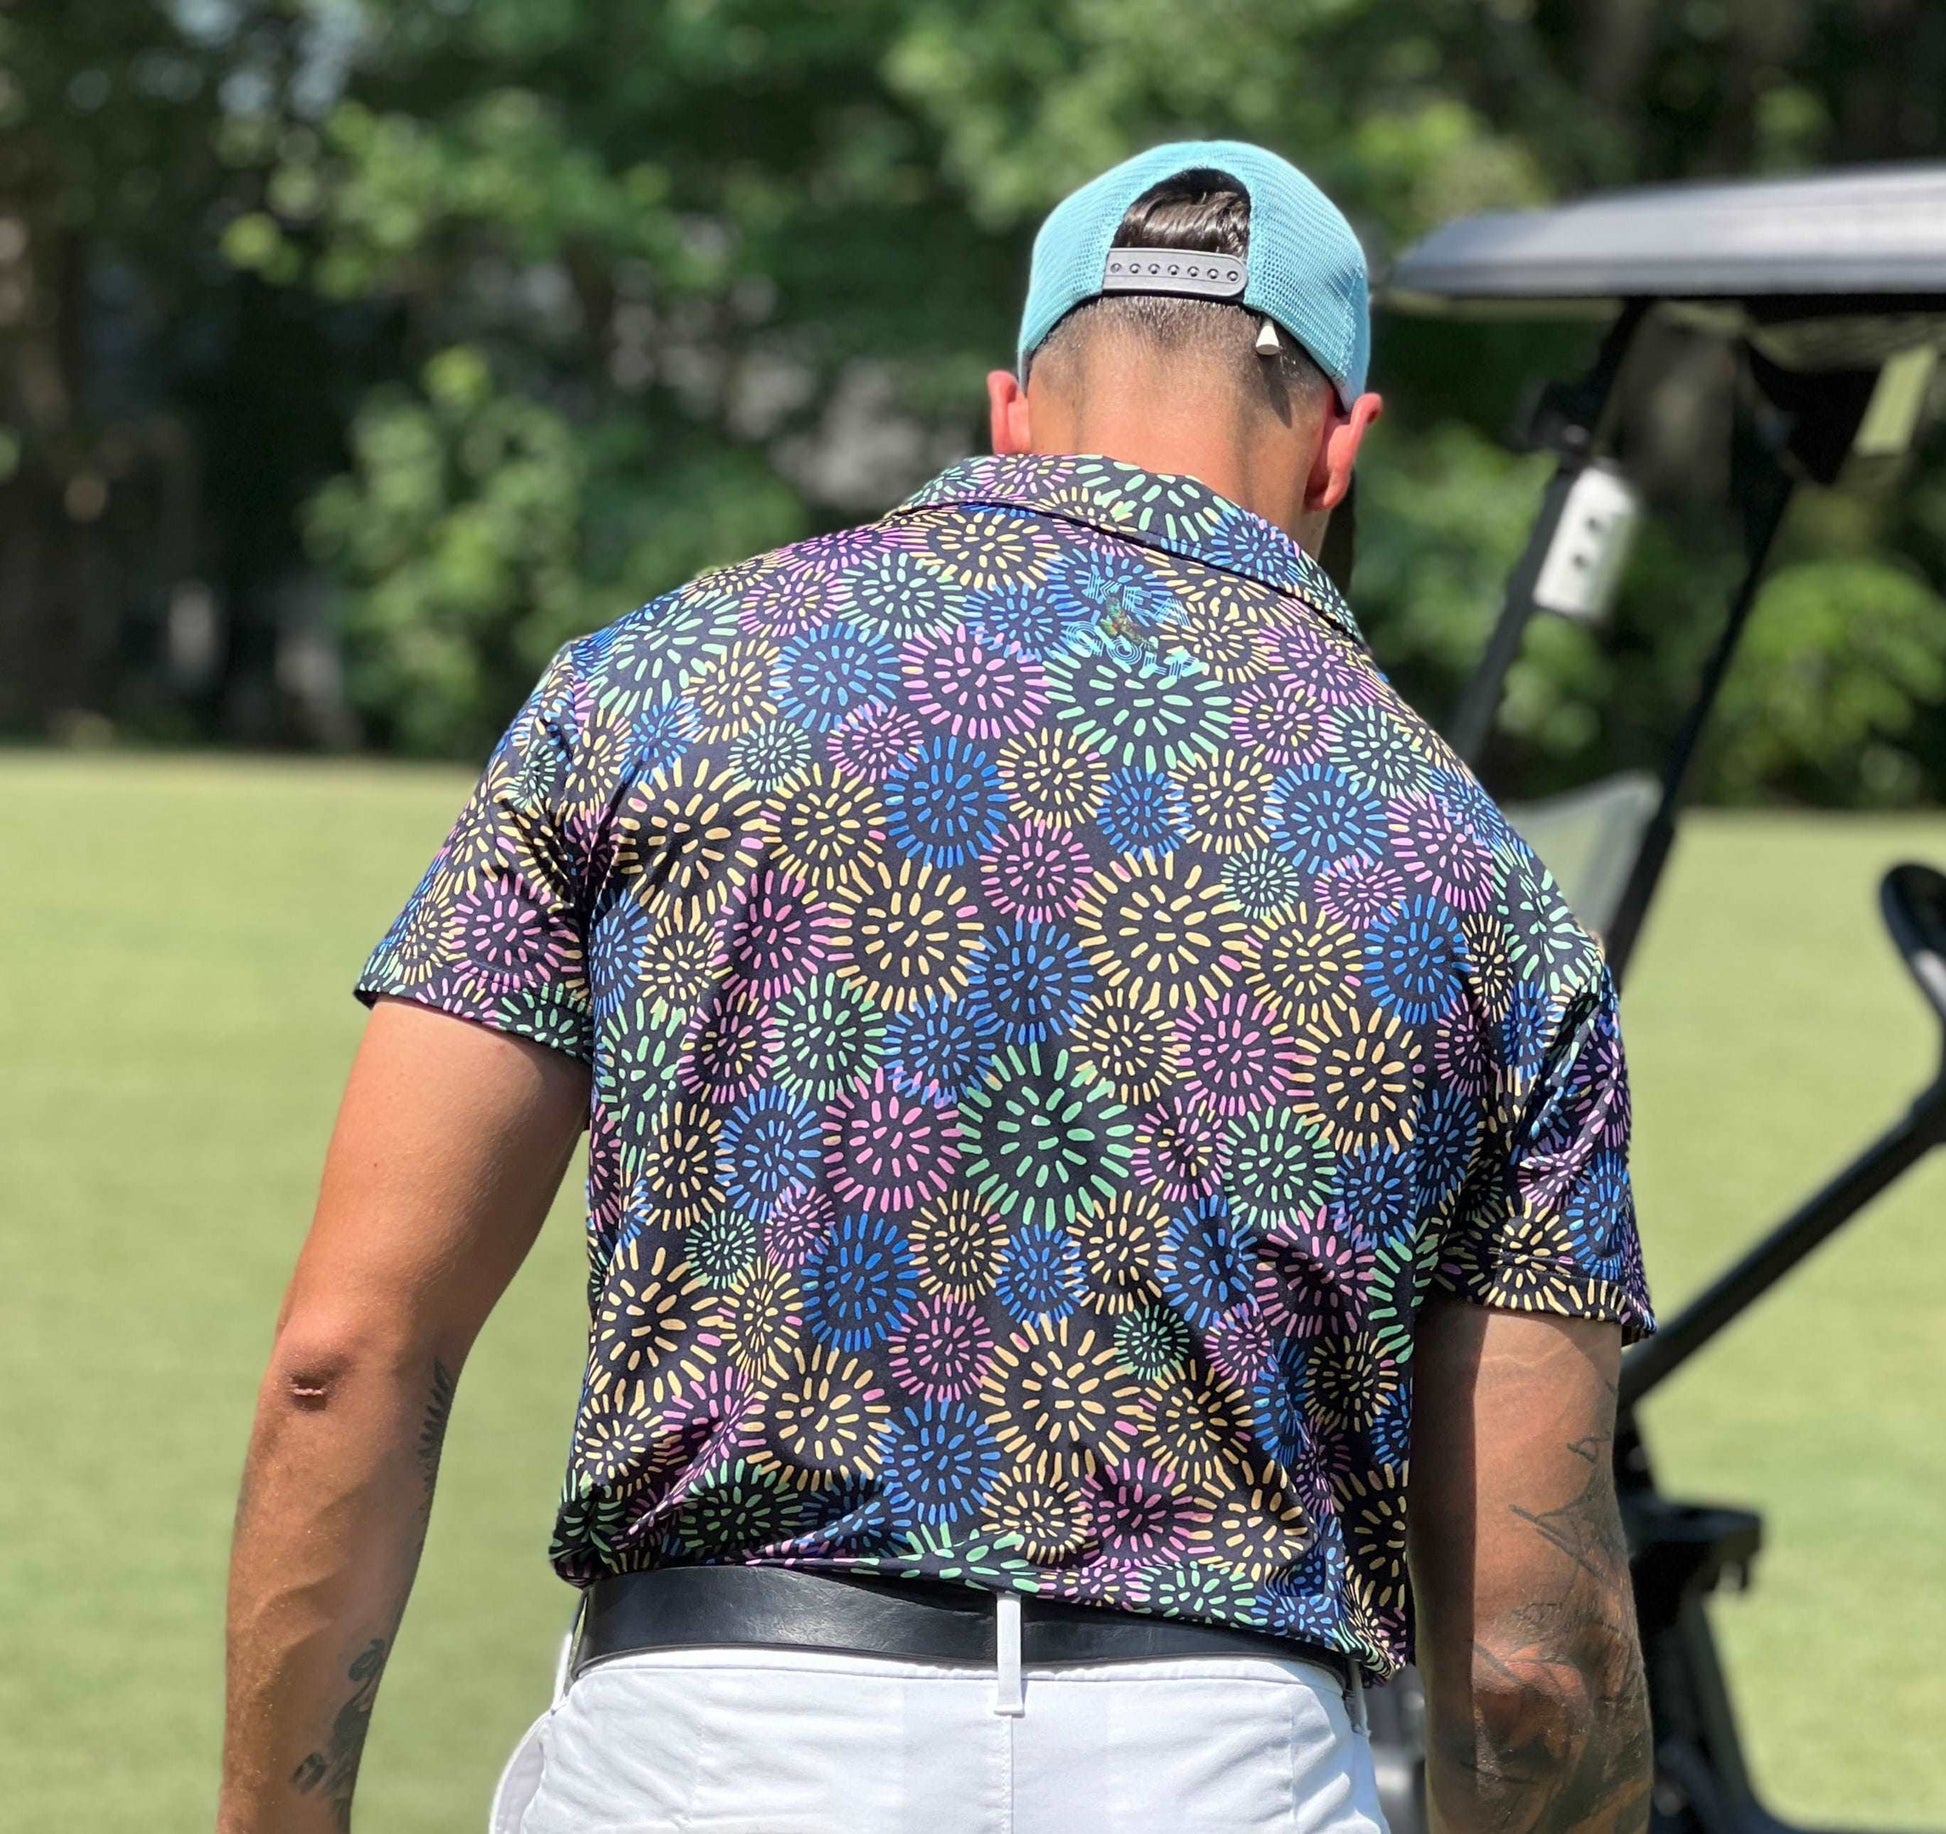 multi colored fun golf shirt with dandelions, back of shirt